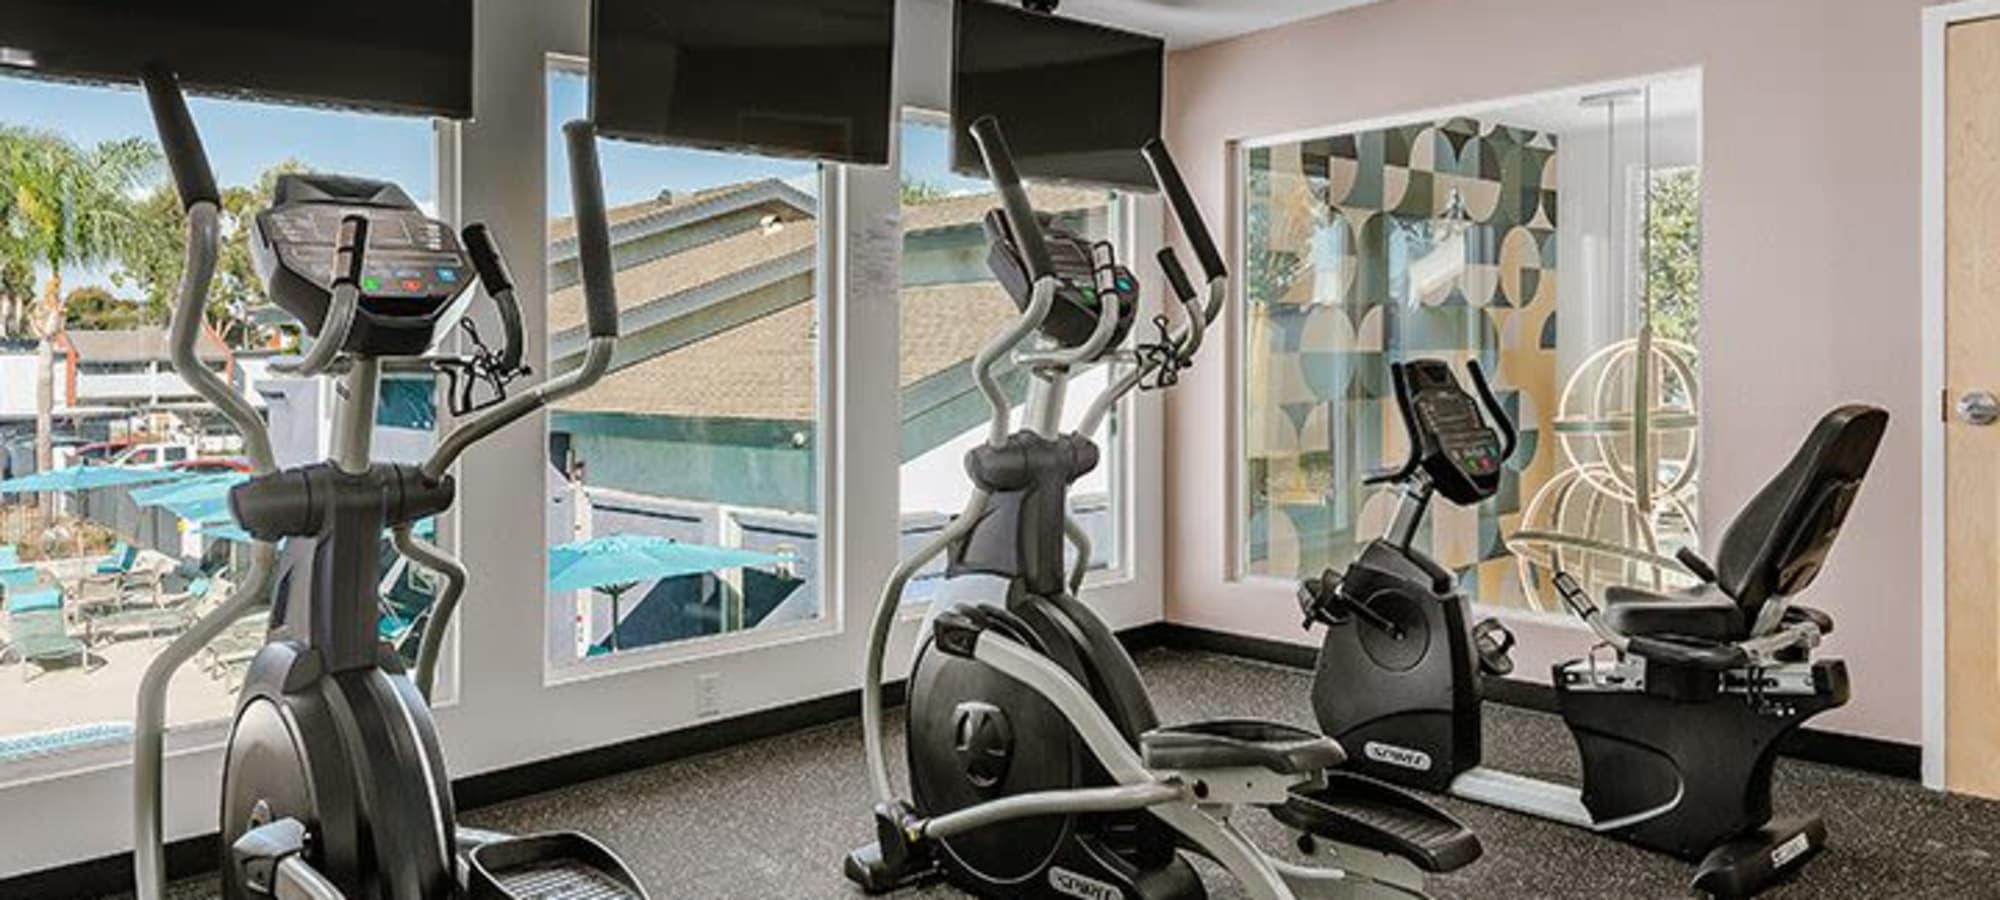 Fitness center with cardio equipment and a view at Reserve at South Coast in Santa Ana, California